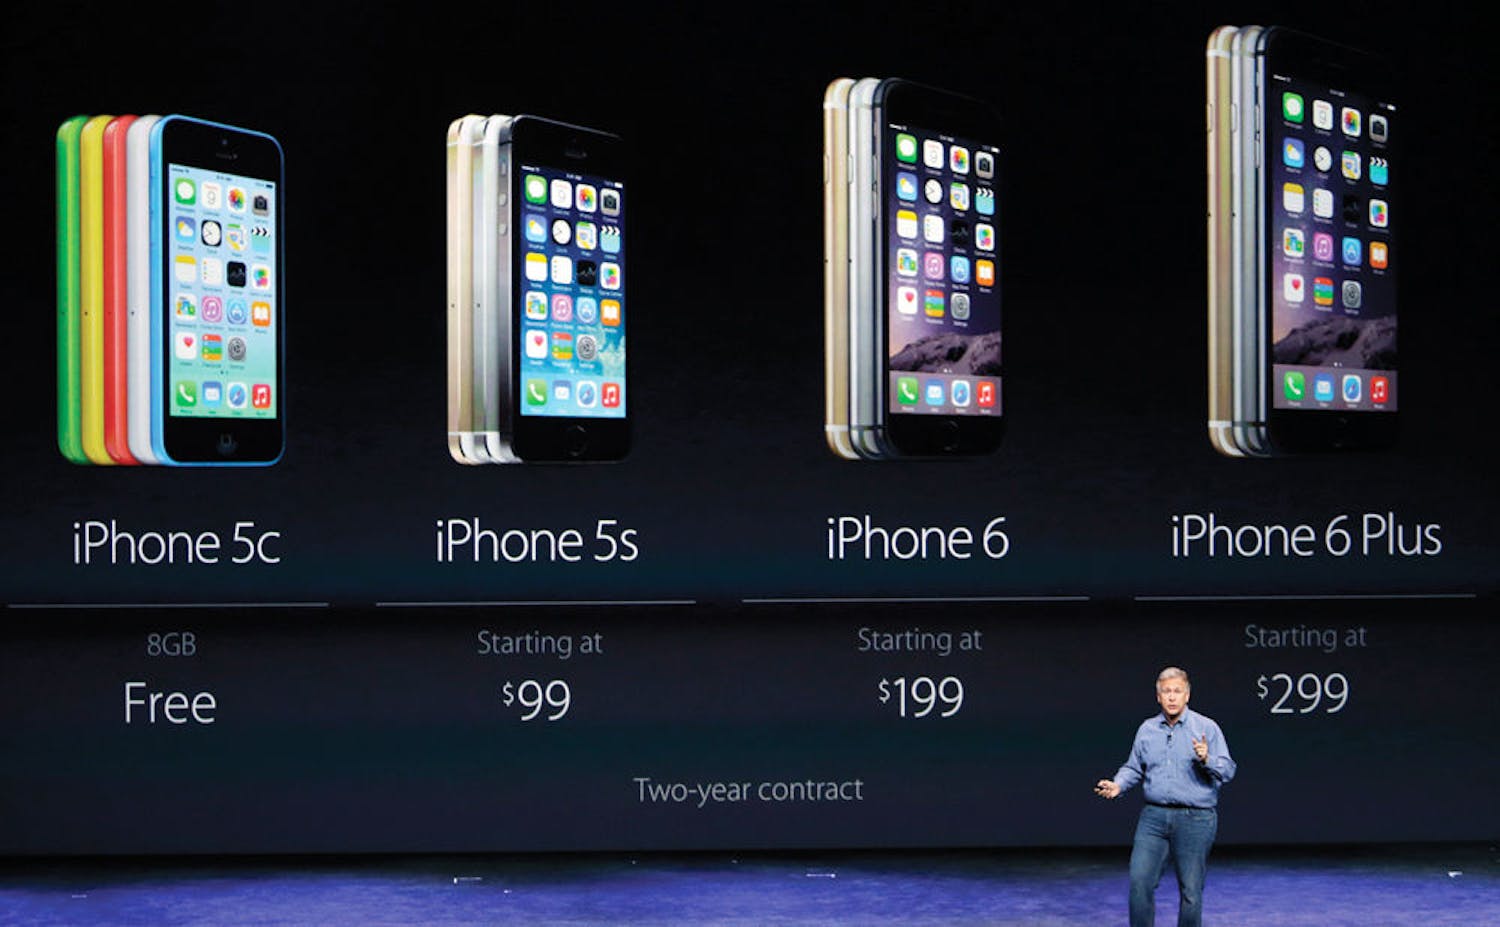 Phil Schiller, Apple's senior vice president of worldwide product marketing, discusses the costs of the new iPhone 6 and iPhone 6 plus on Tuesday, Sept. 9, 2014, in Cupertino, Calif. (AP Photo/Marcio Jose Sanchez)